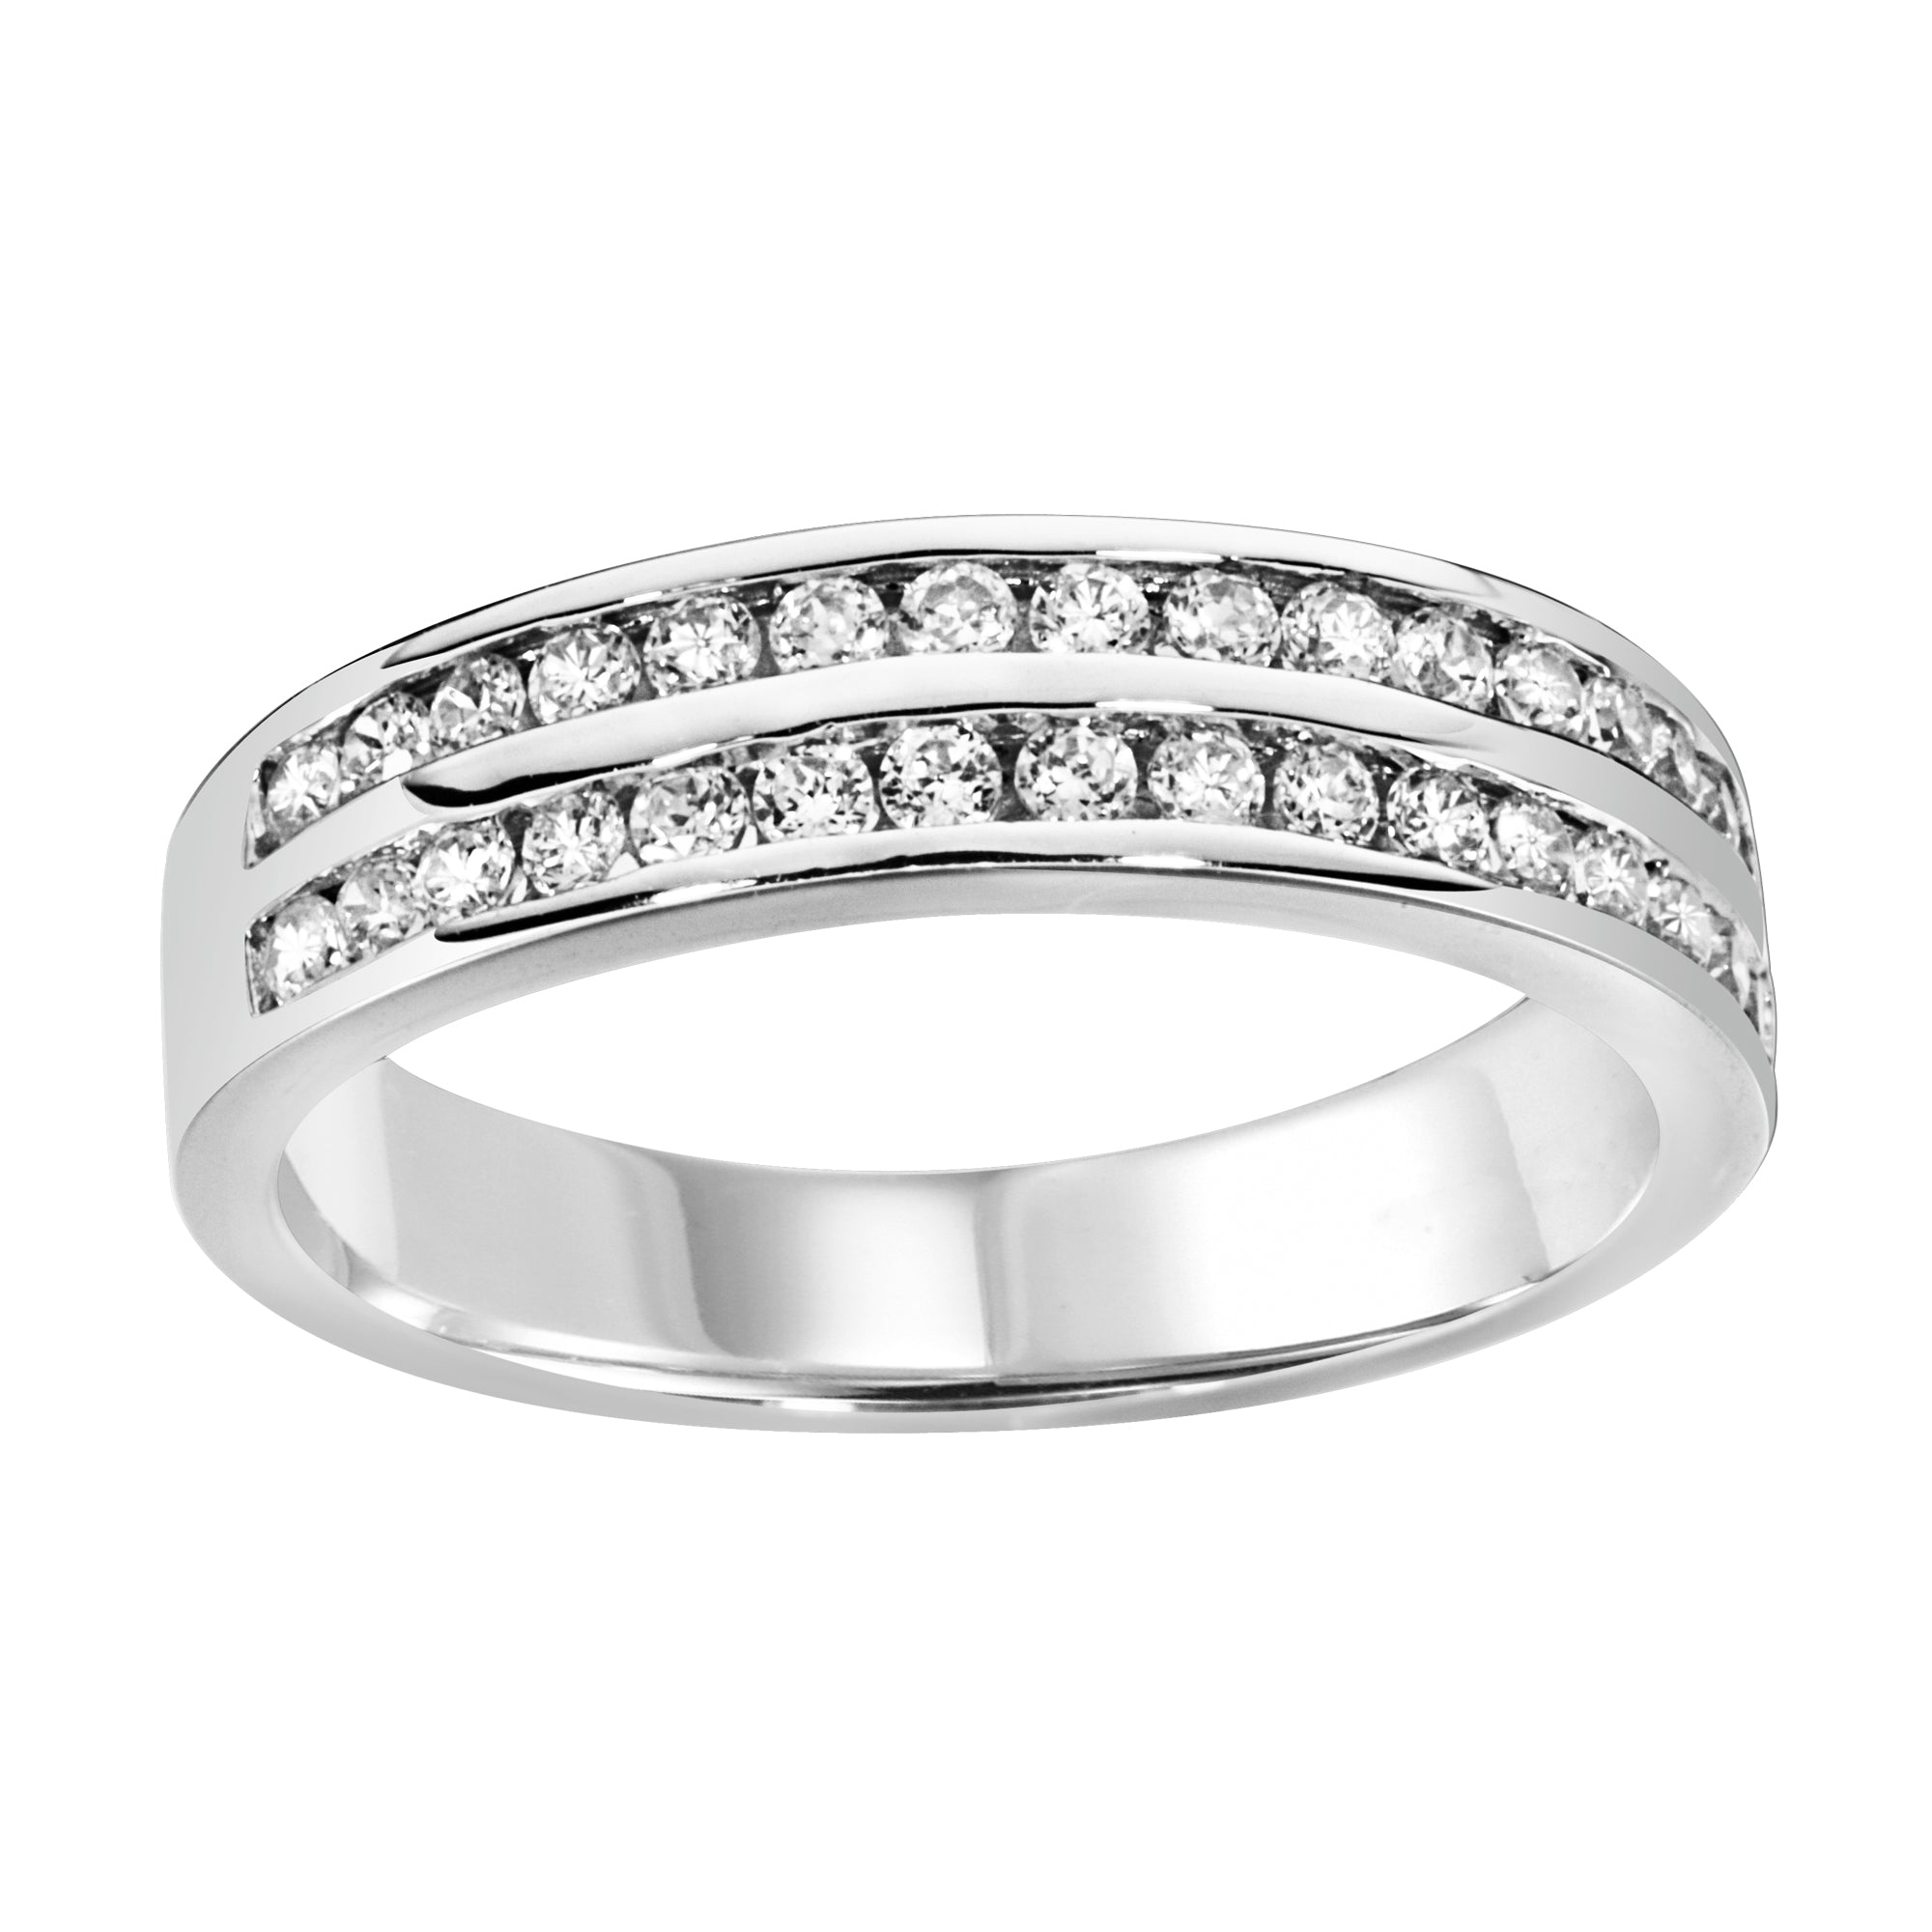 Sterling Silver Cubic Zirconia Ring -  AK1042 - Hallmark Jewellers Formby & The Jewellers Bench Widnes